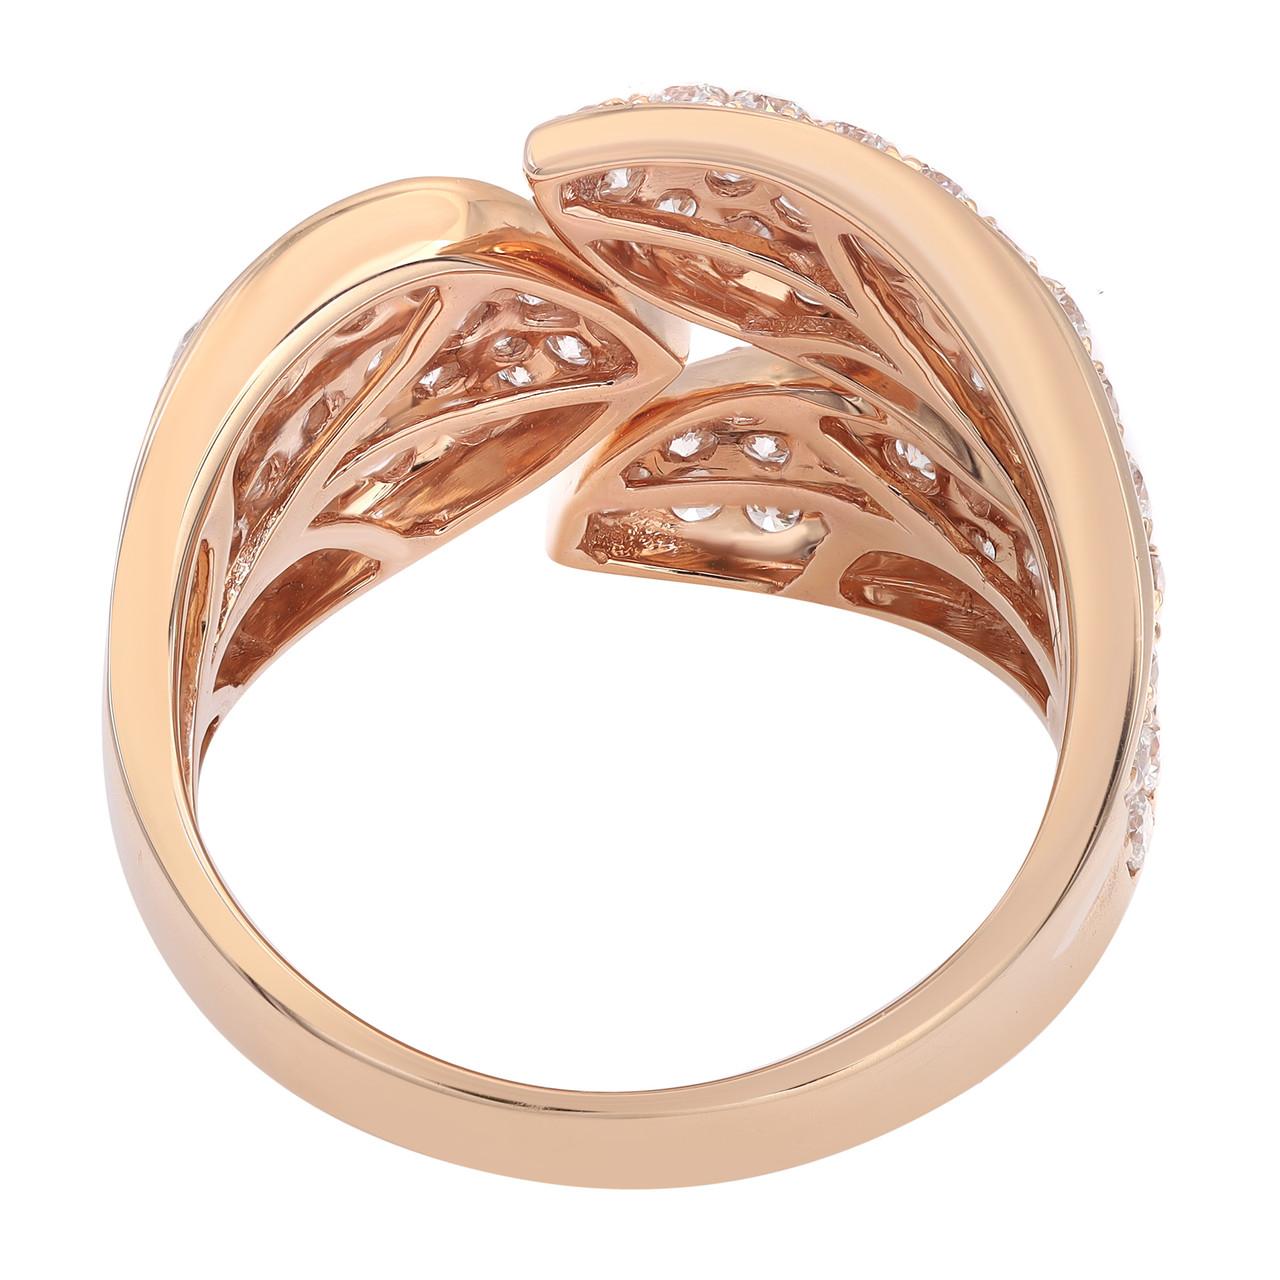 2.00 Carat Pave Set Round Cut Diamond Ring 18K Rose Gold  In New Condition For Sale In New York, NY